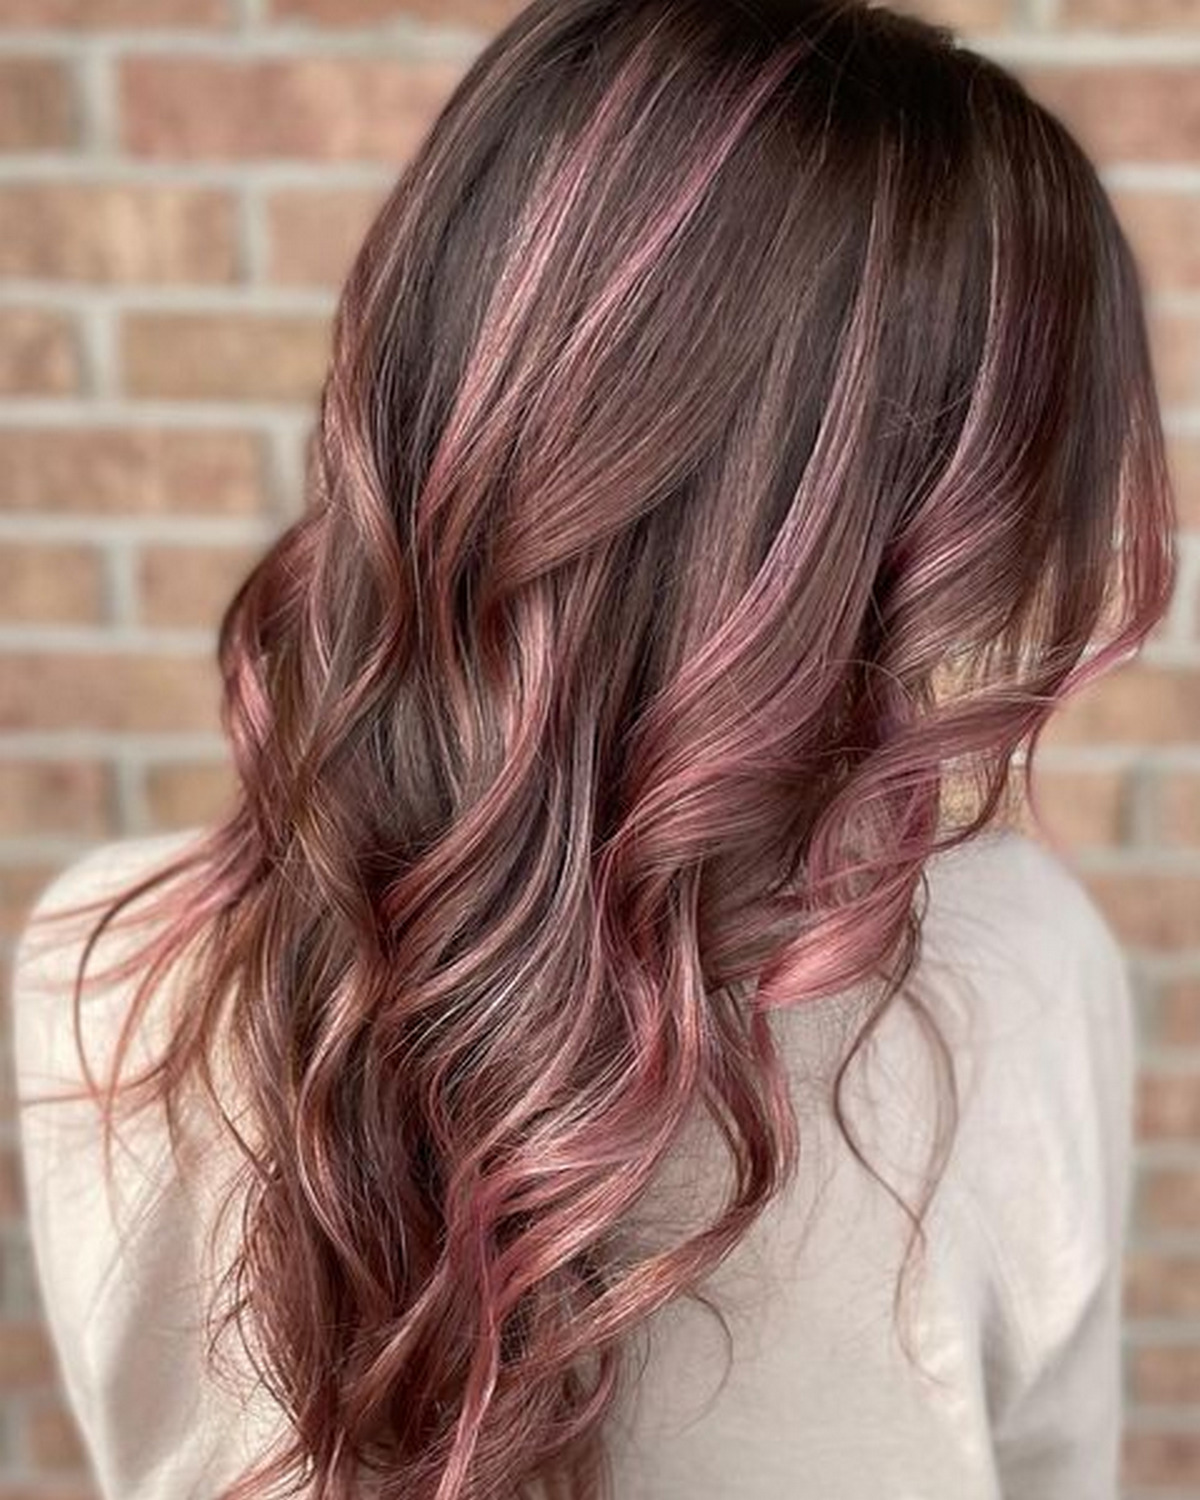 Black Hair And Rose Gold Highlights